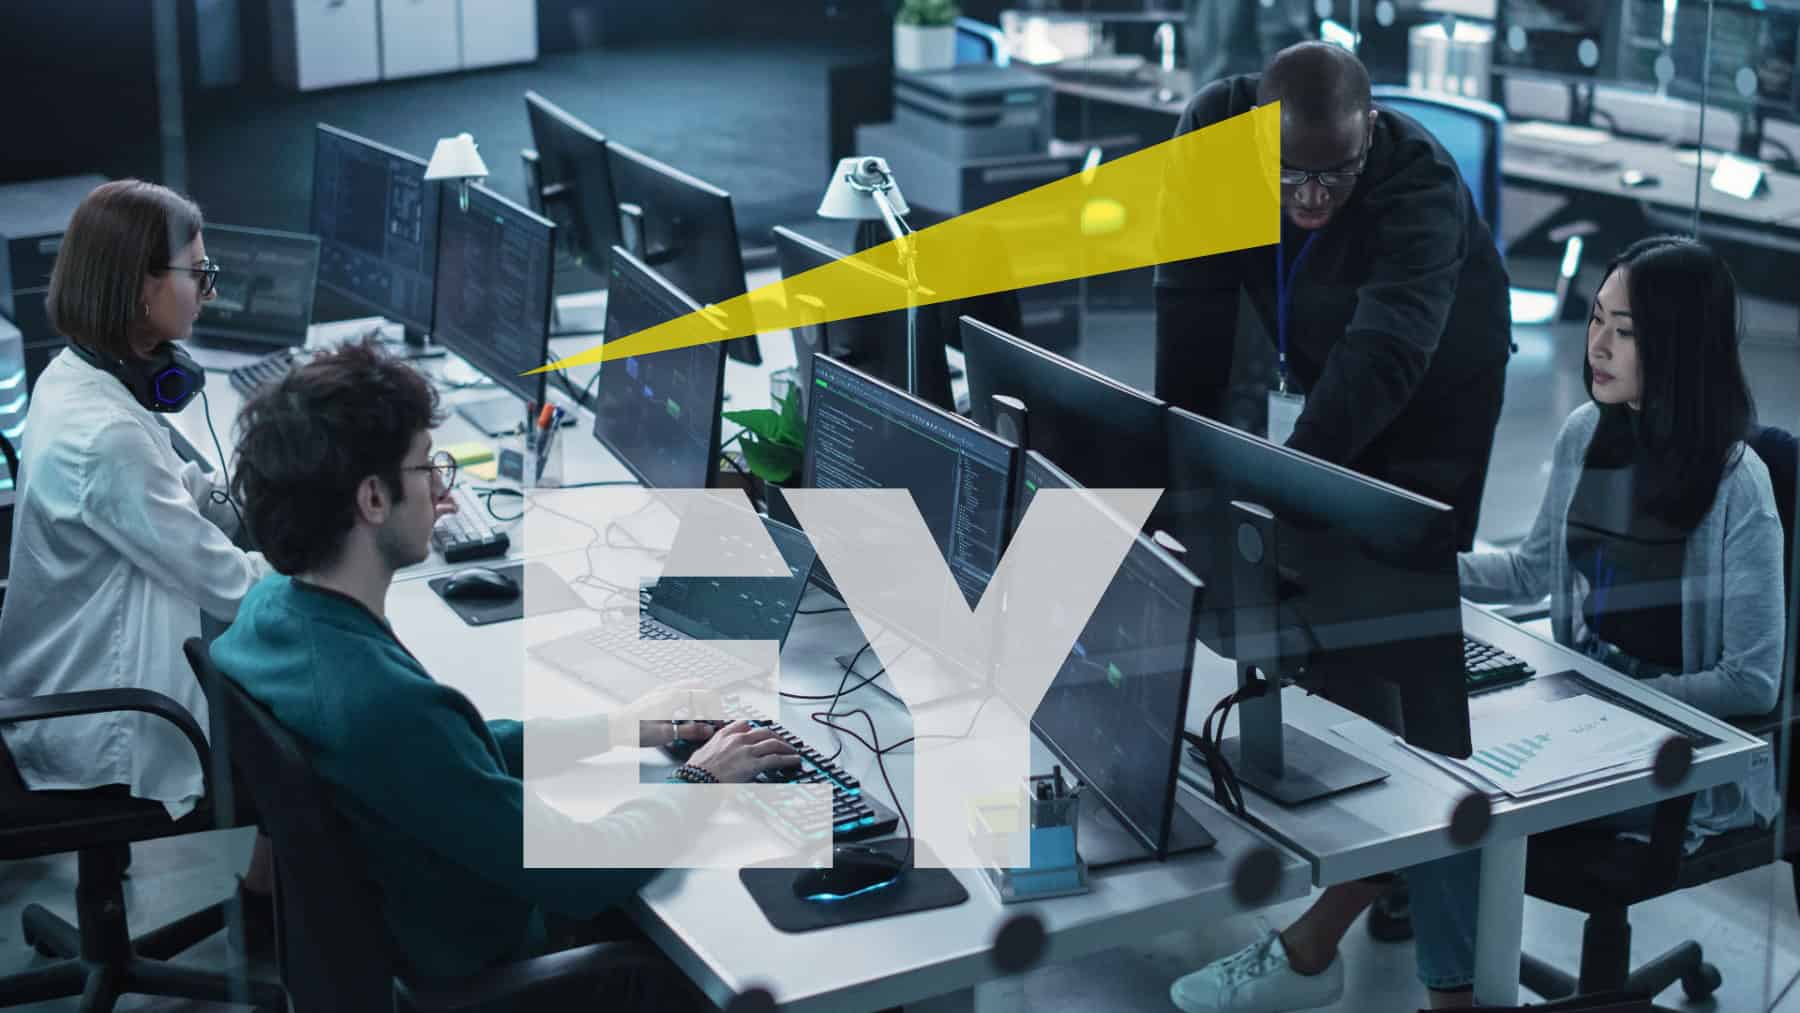 EY Dell Edge Technologies Lab Digital transformation strategies Industry 4.0 innovation Edge computing applications AI in business processes